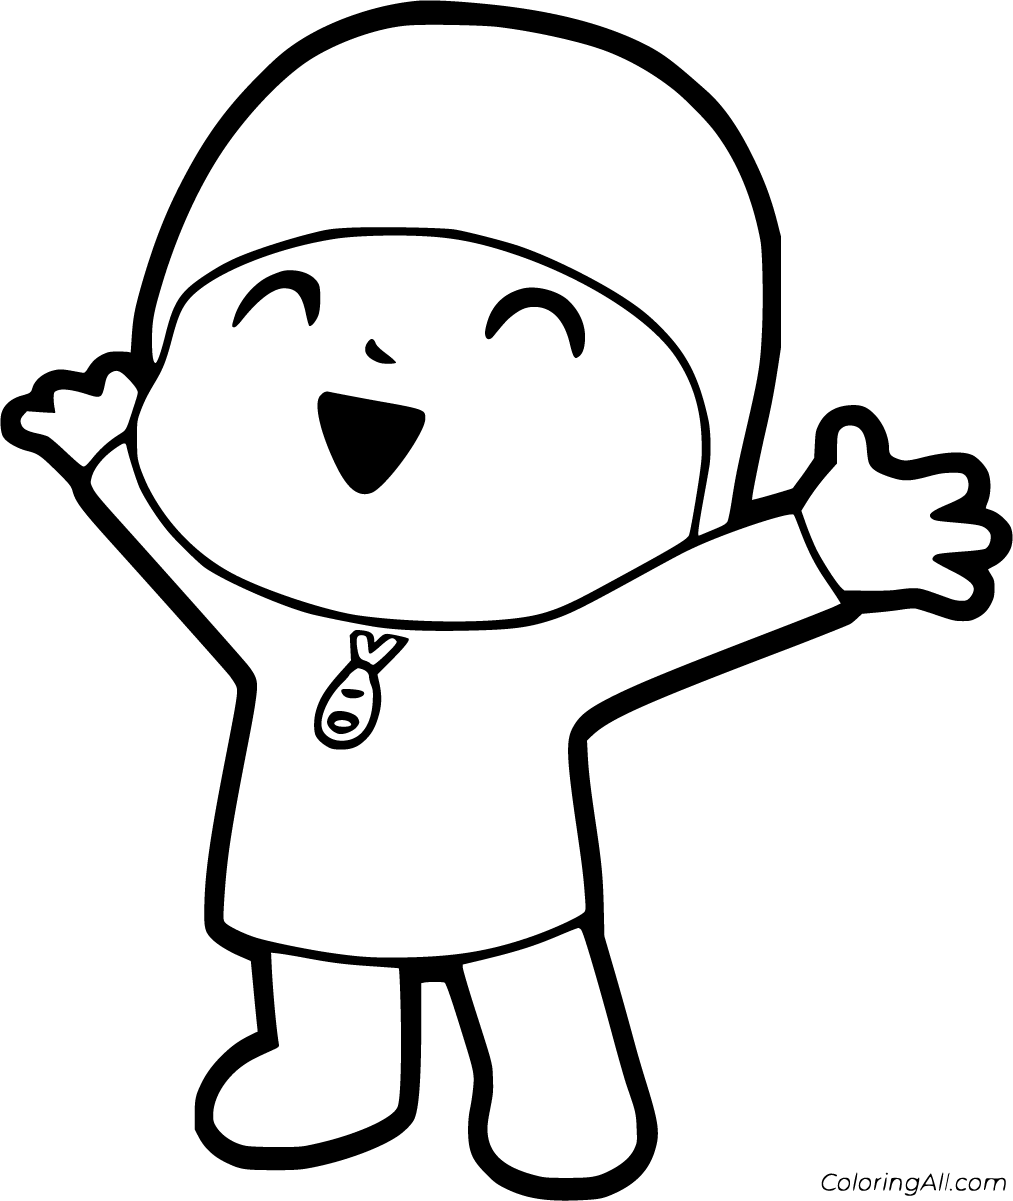 Download 66+ Sleepy Bird Pocoyo Coloring Pages PNG PDF File - Best Free